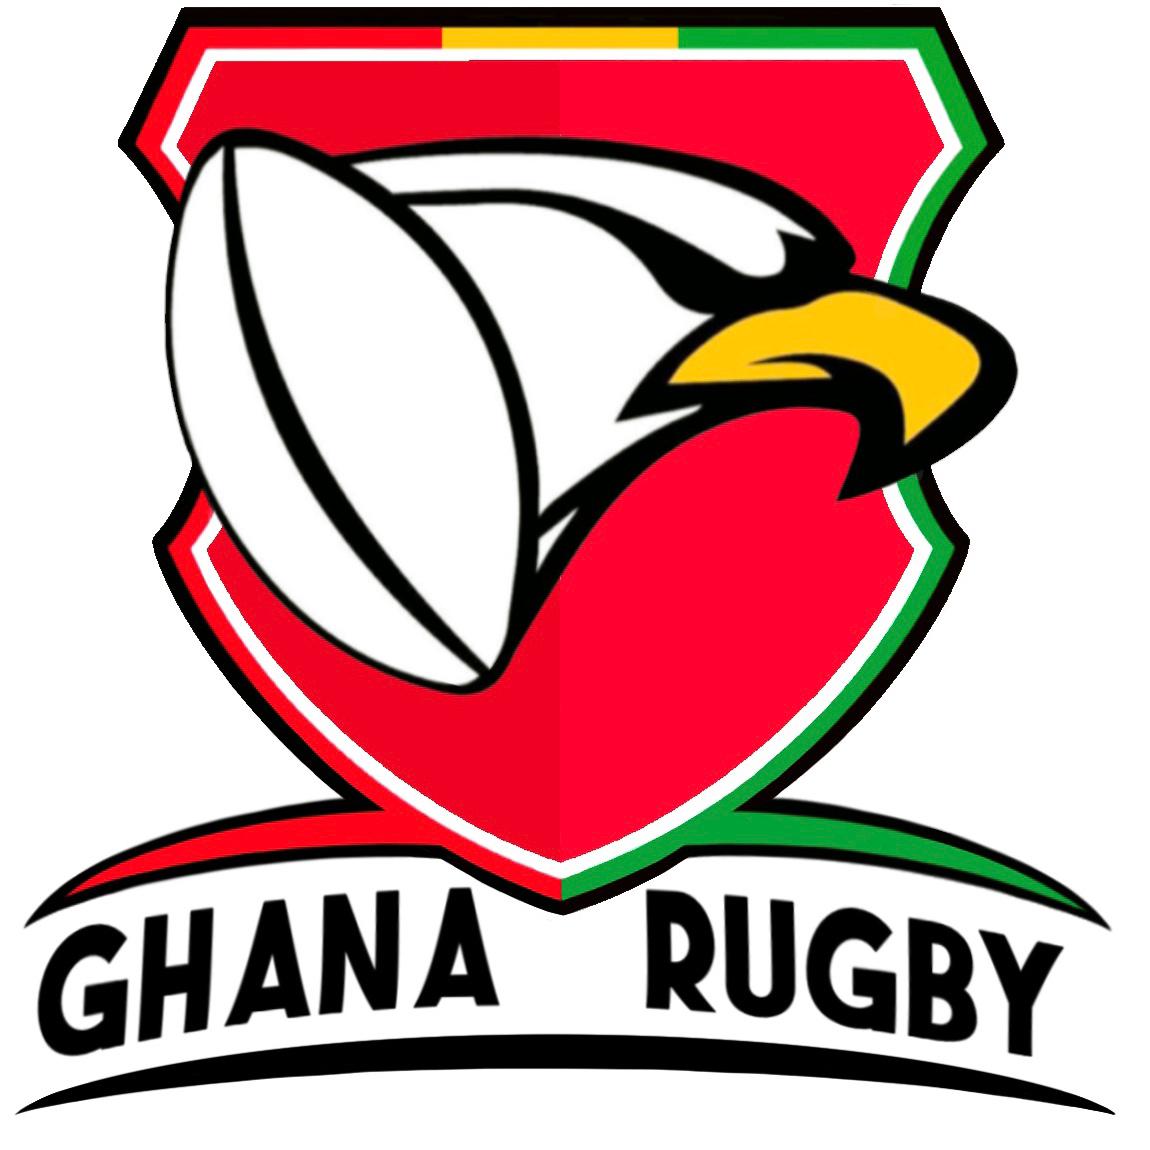 The newly revised Ghana Rugby logo